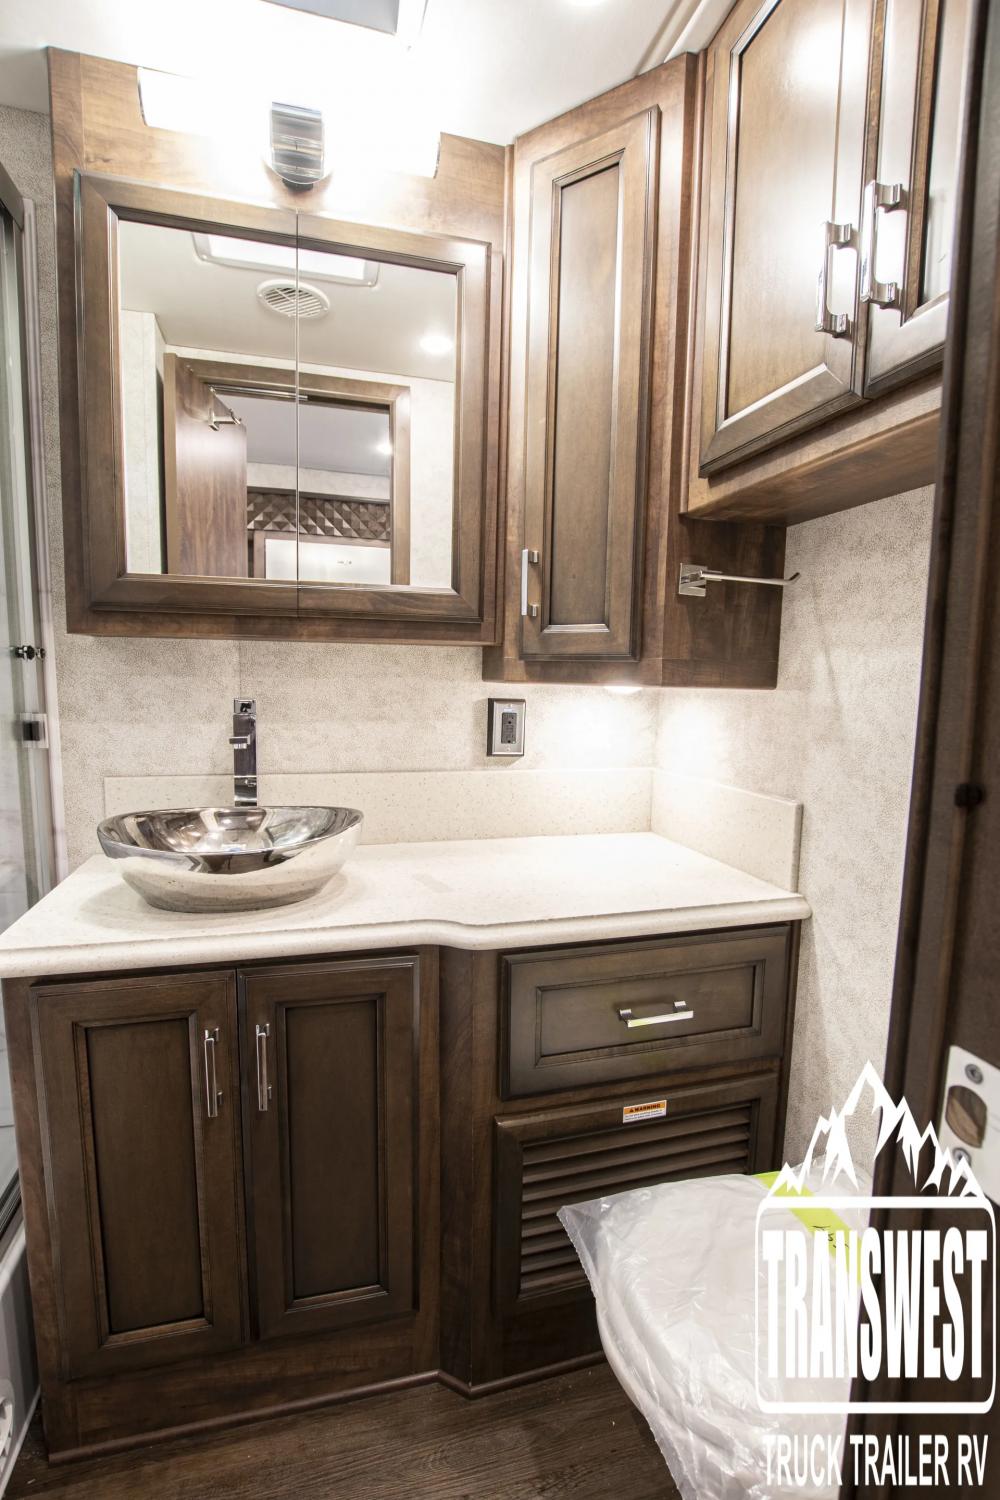 2023 Newmar Bay Star 3225 | Photo 10 of 14